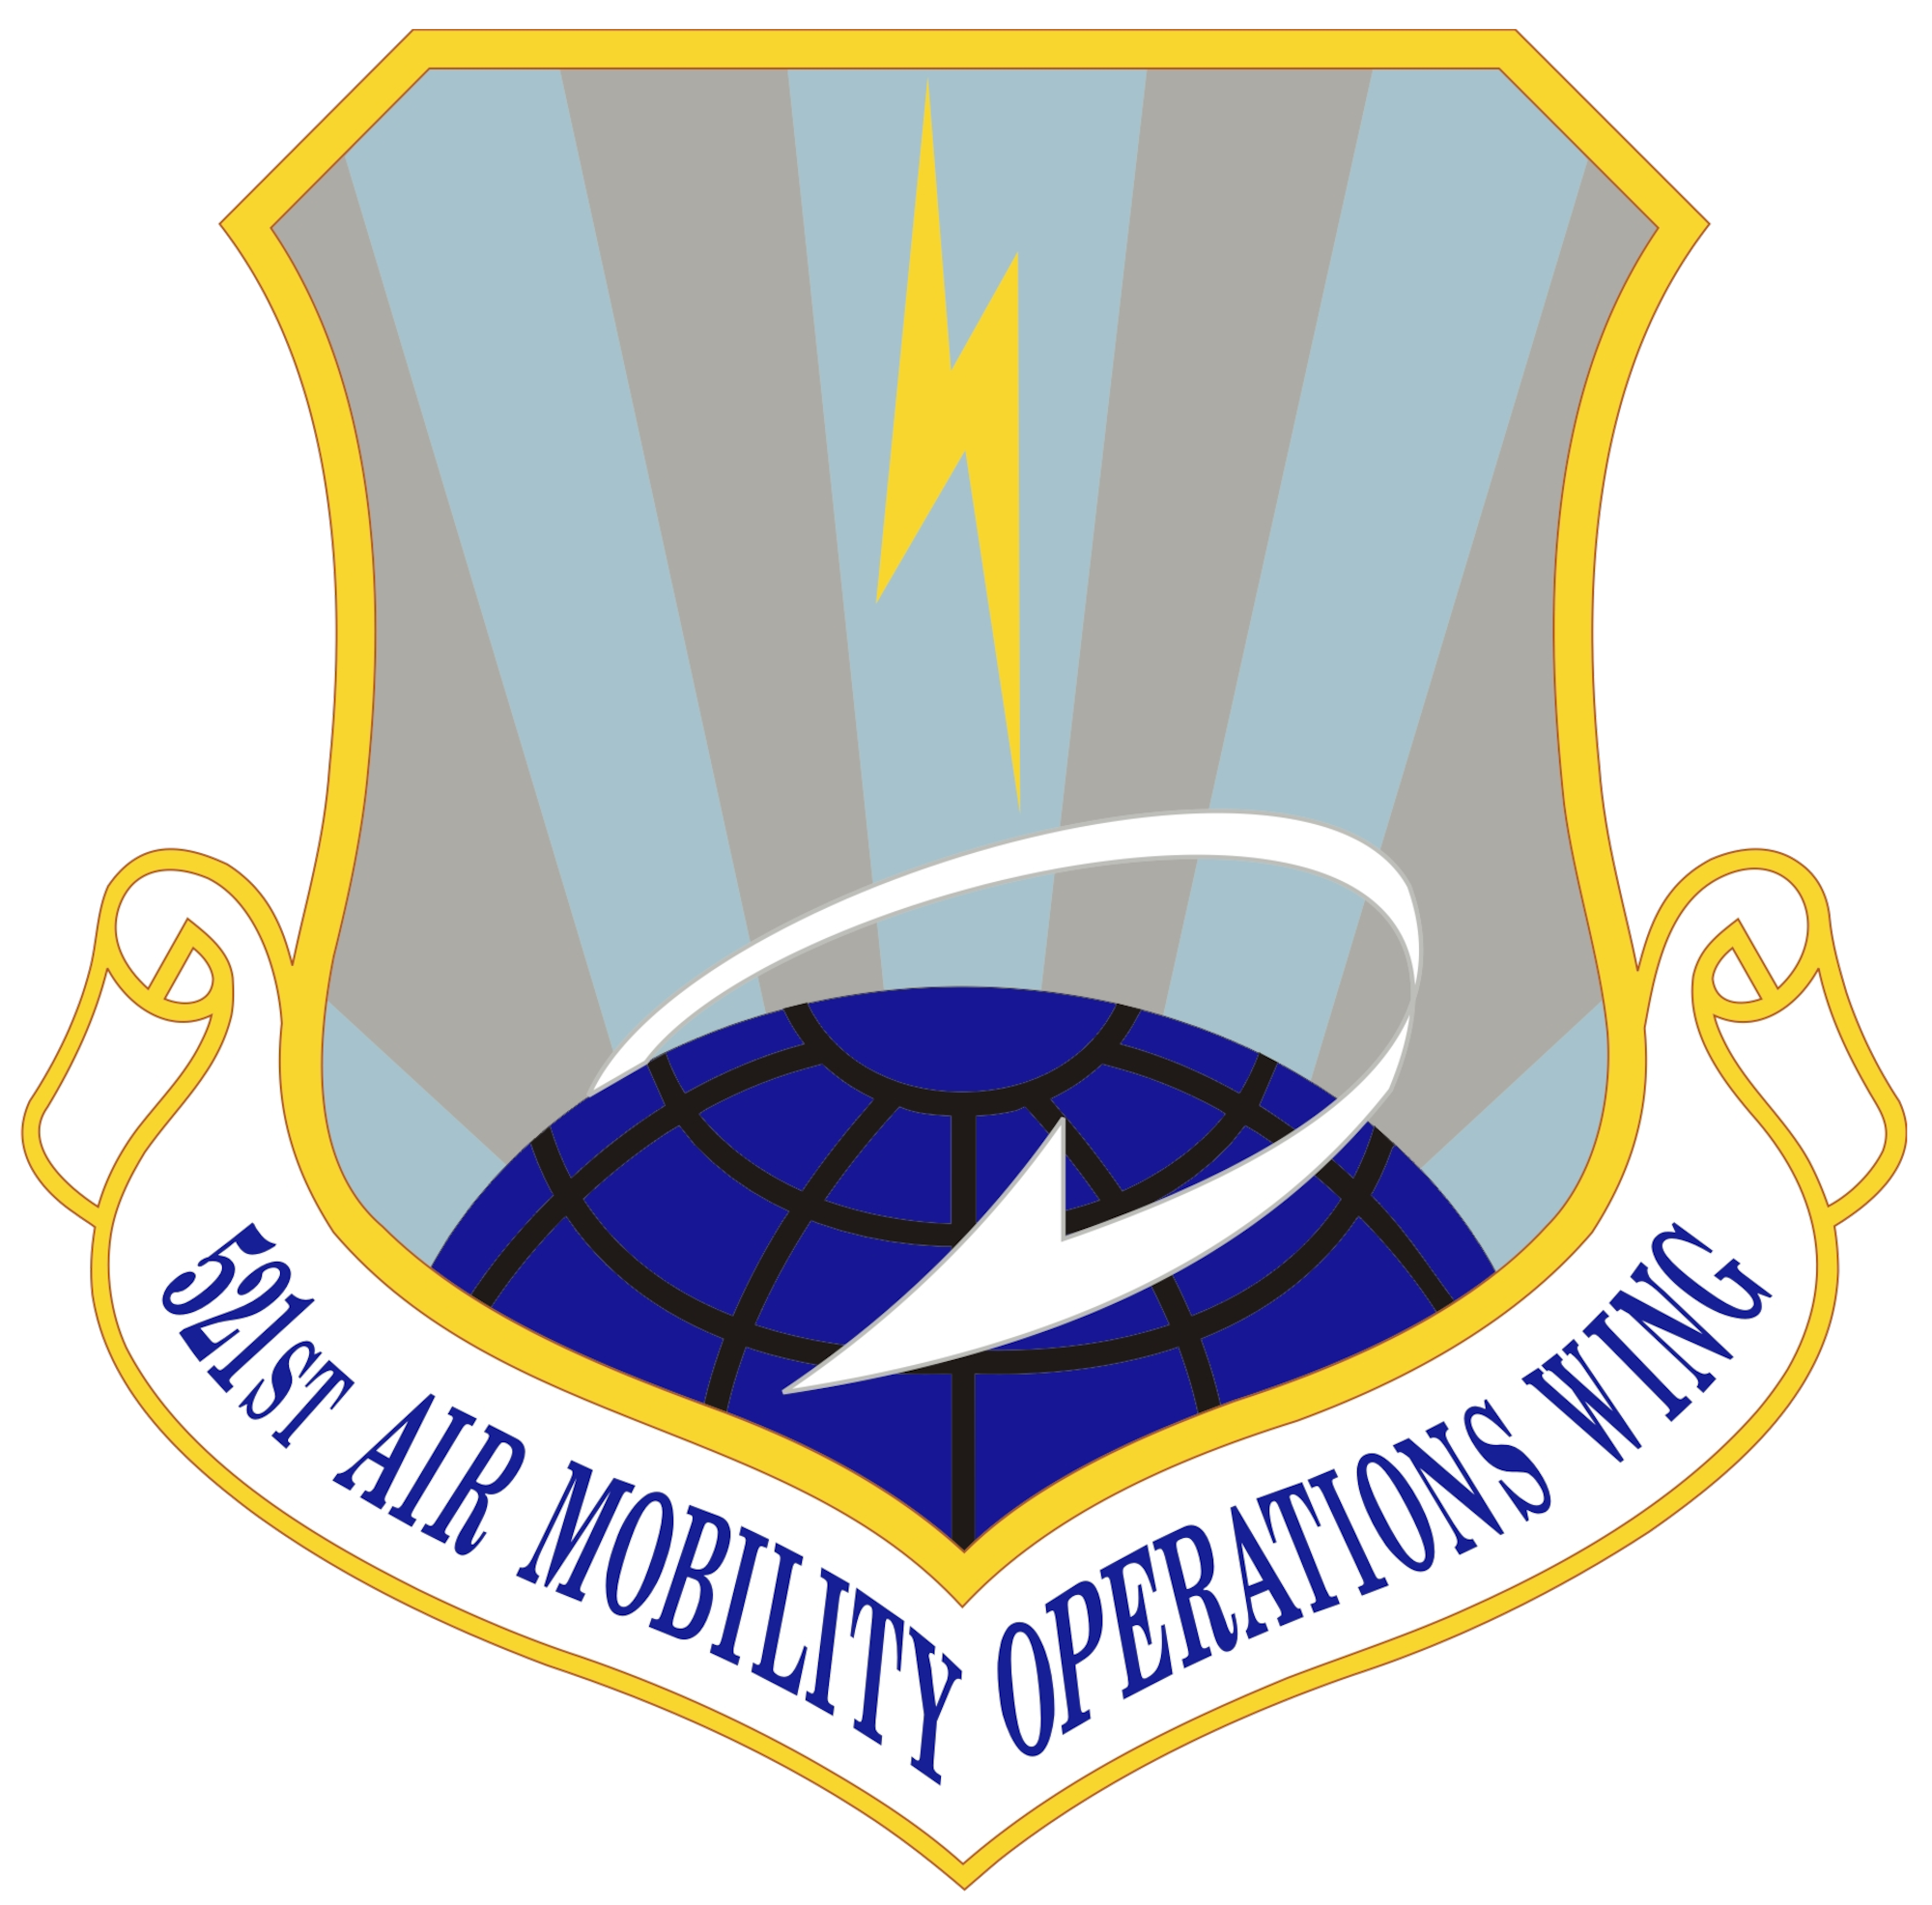 521st Air Mobility Operations Wing Shield